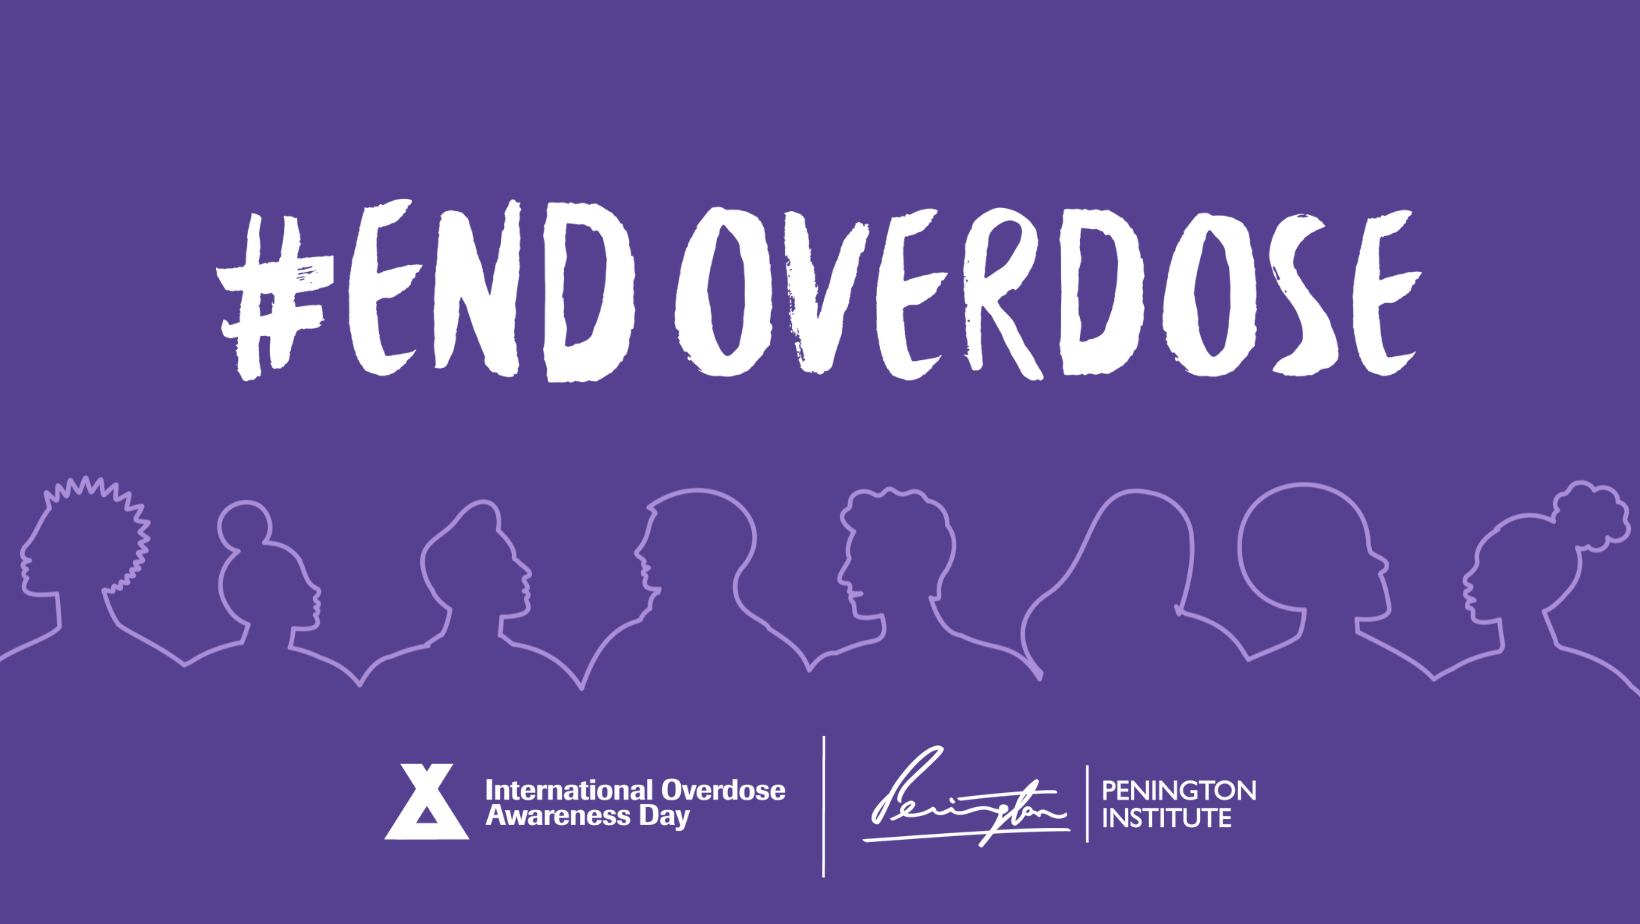 End overdose this IOAD2023